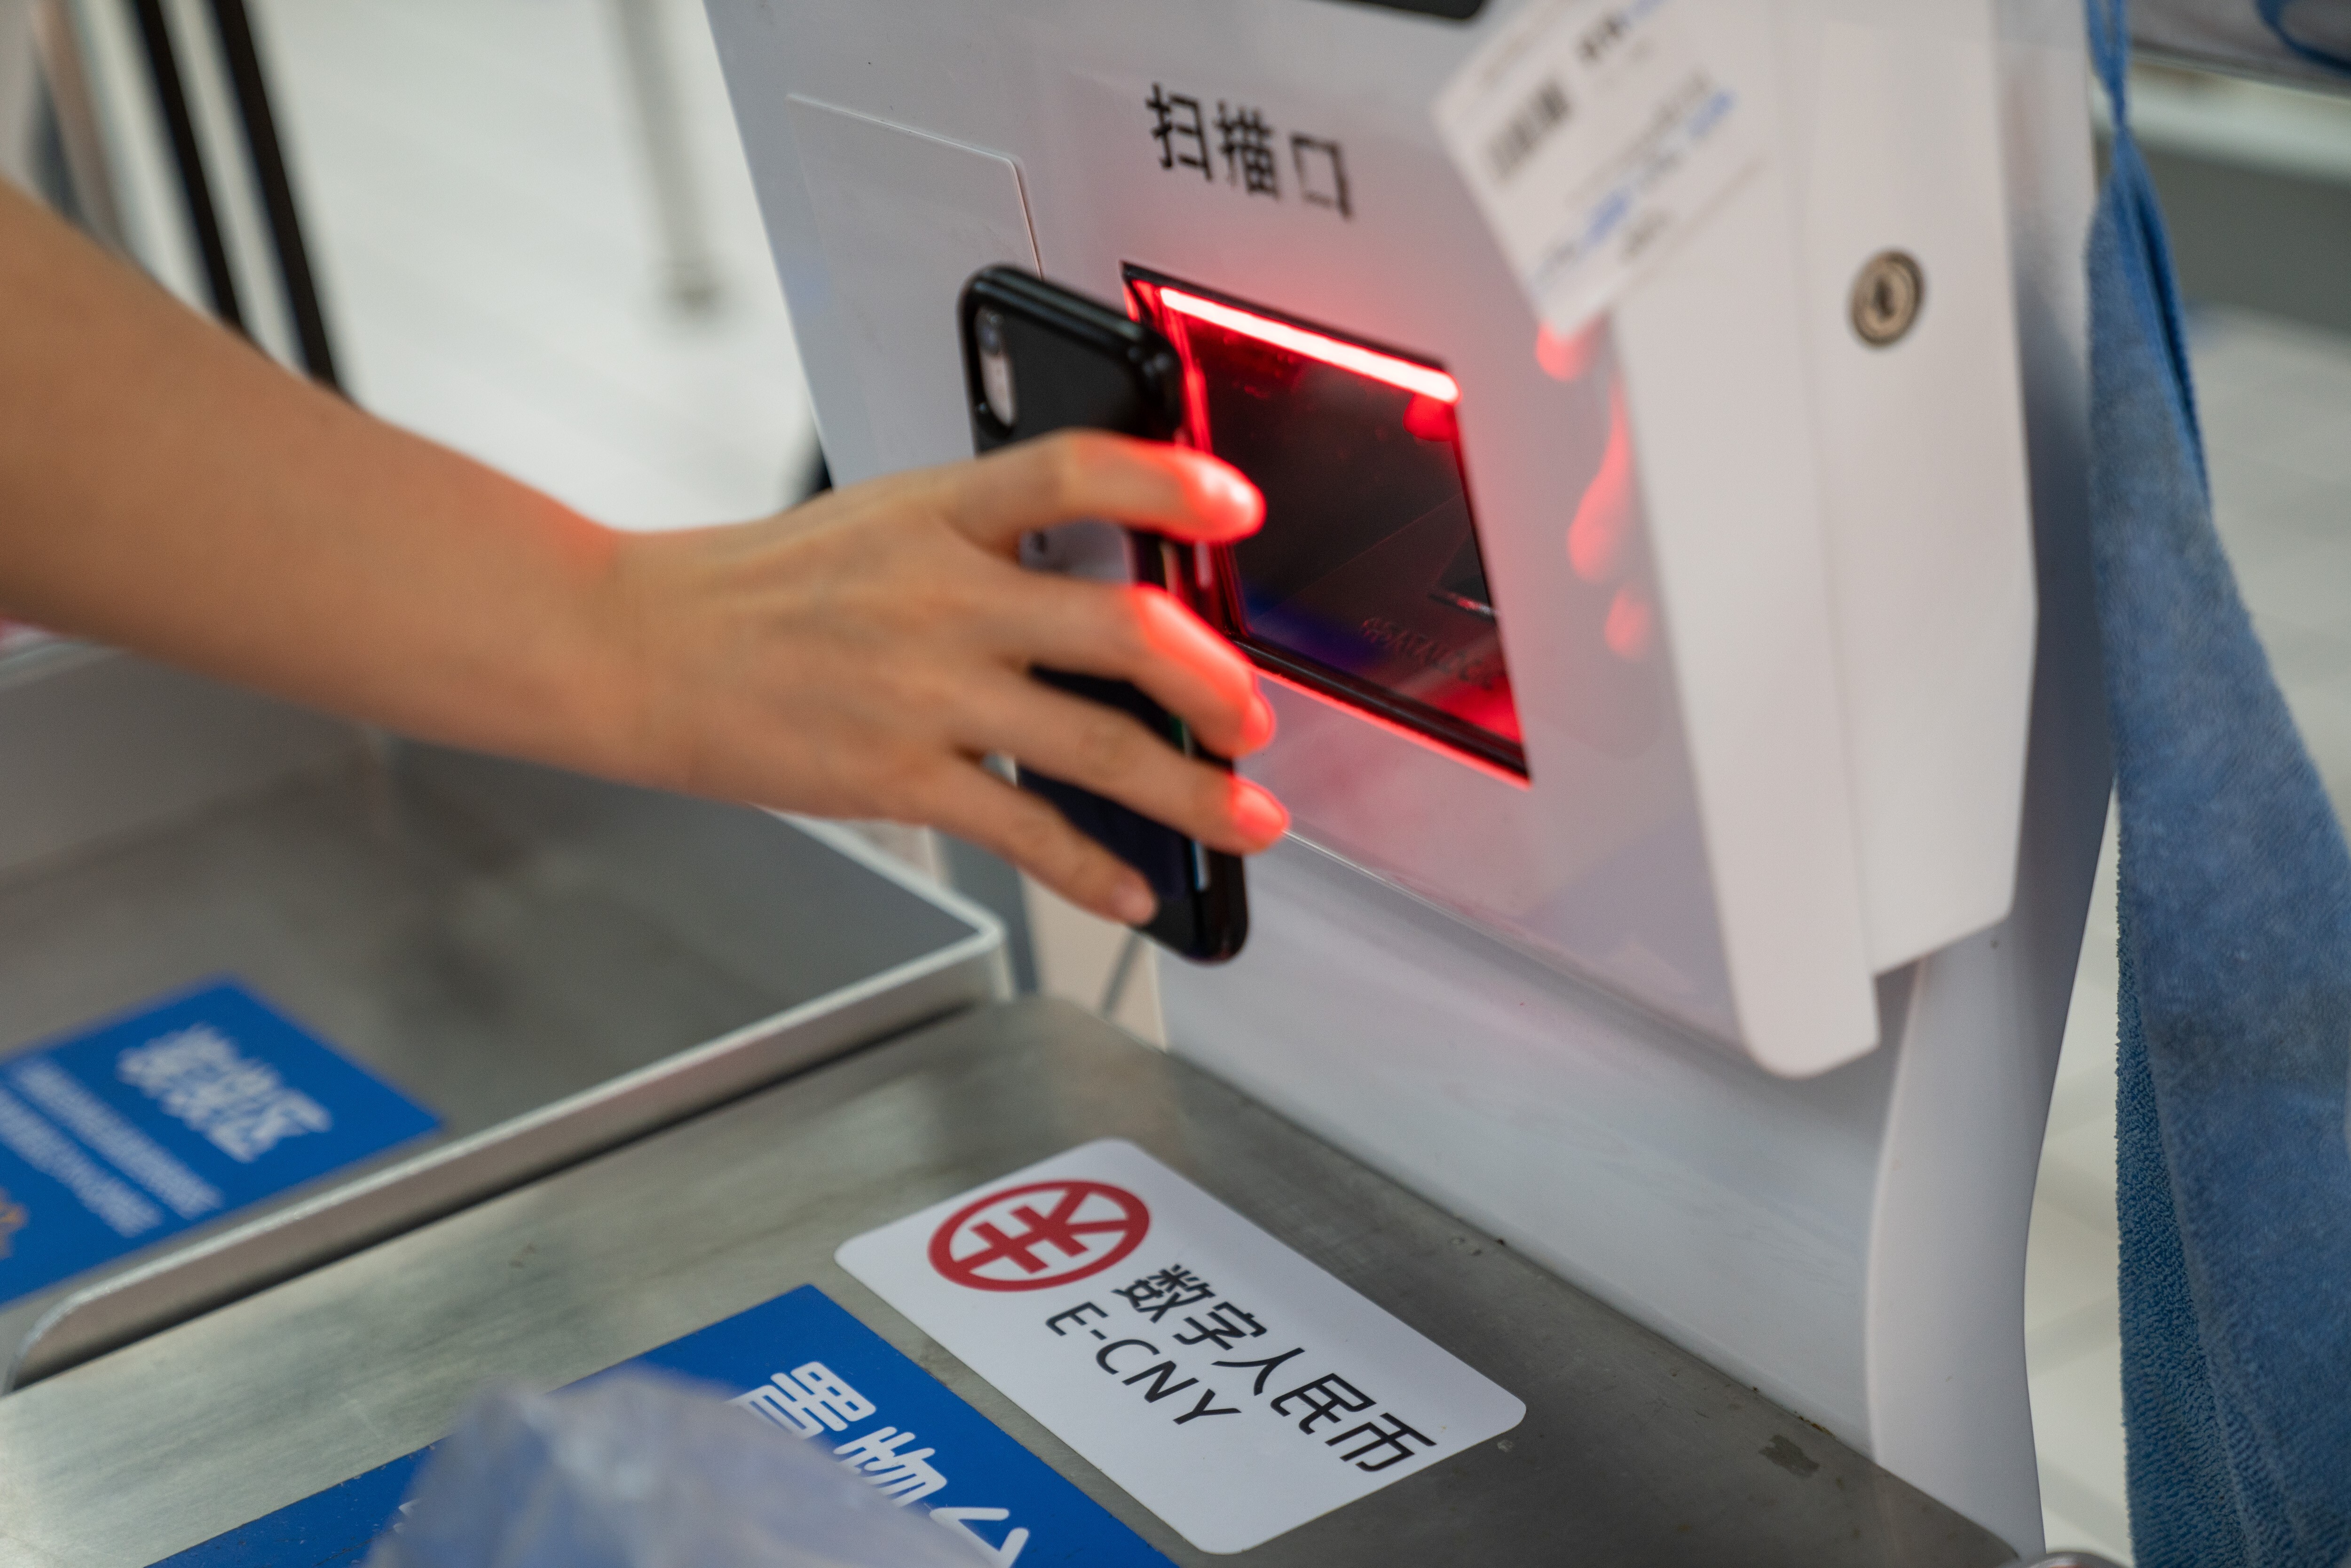 More than 2 billion yuan (US$314 million) has been spent by Chinese consumers using the new digital yuan at shops, restaurants and with a select number of online platforms. Photo: Bloomberg